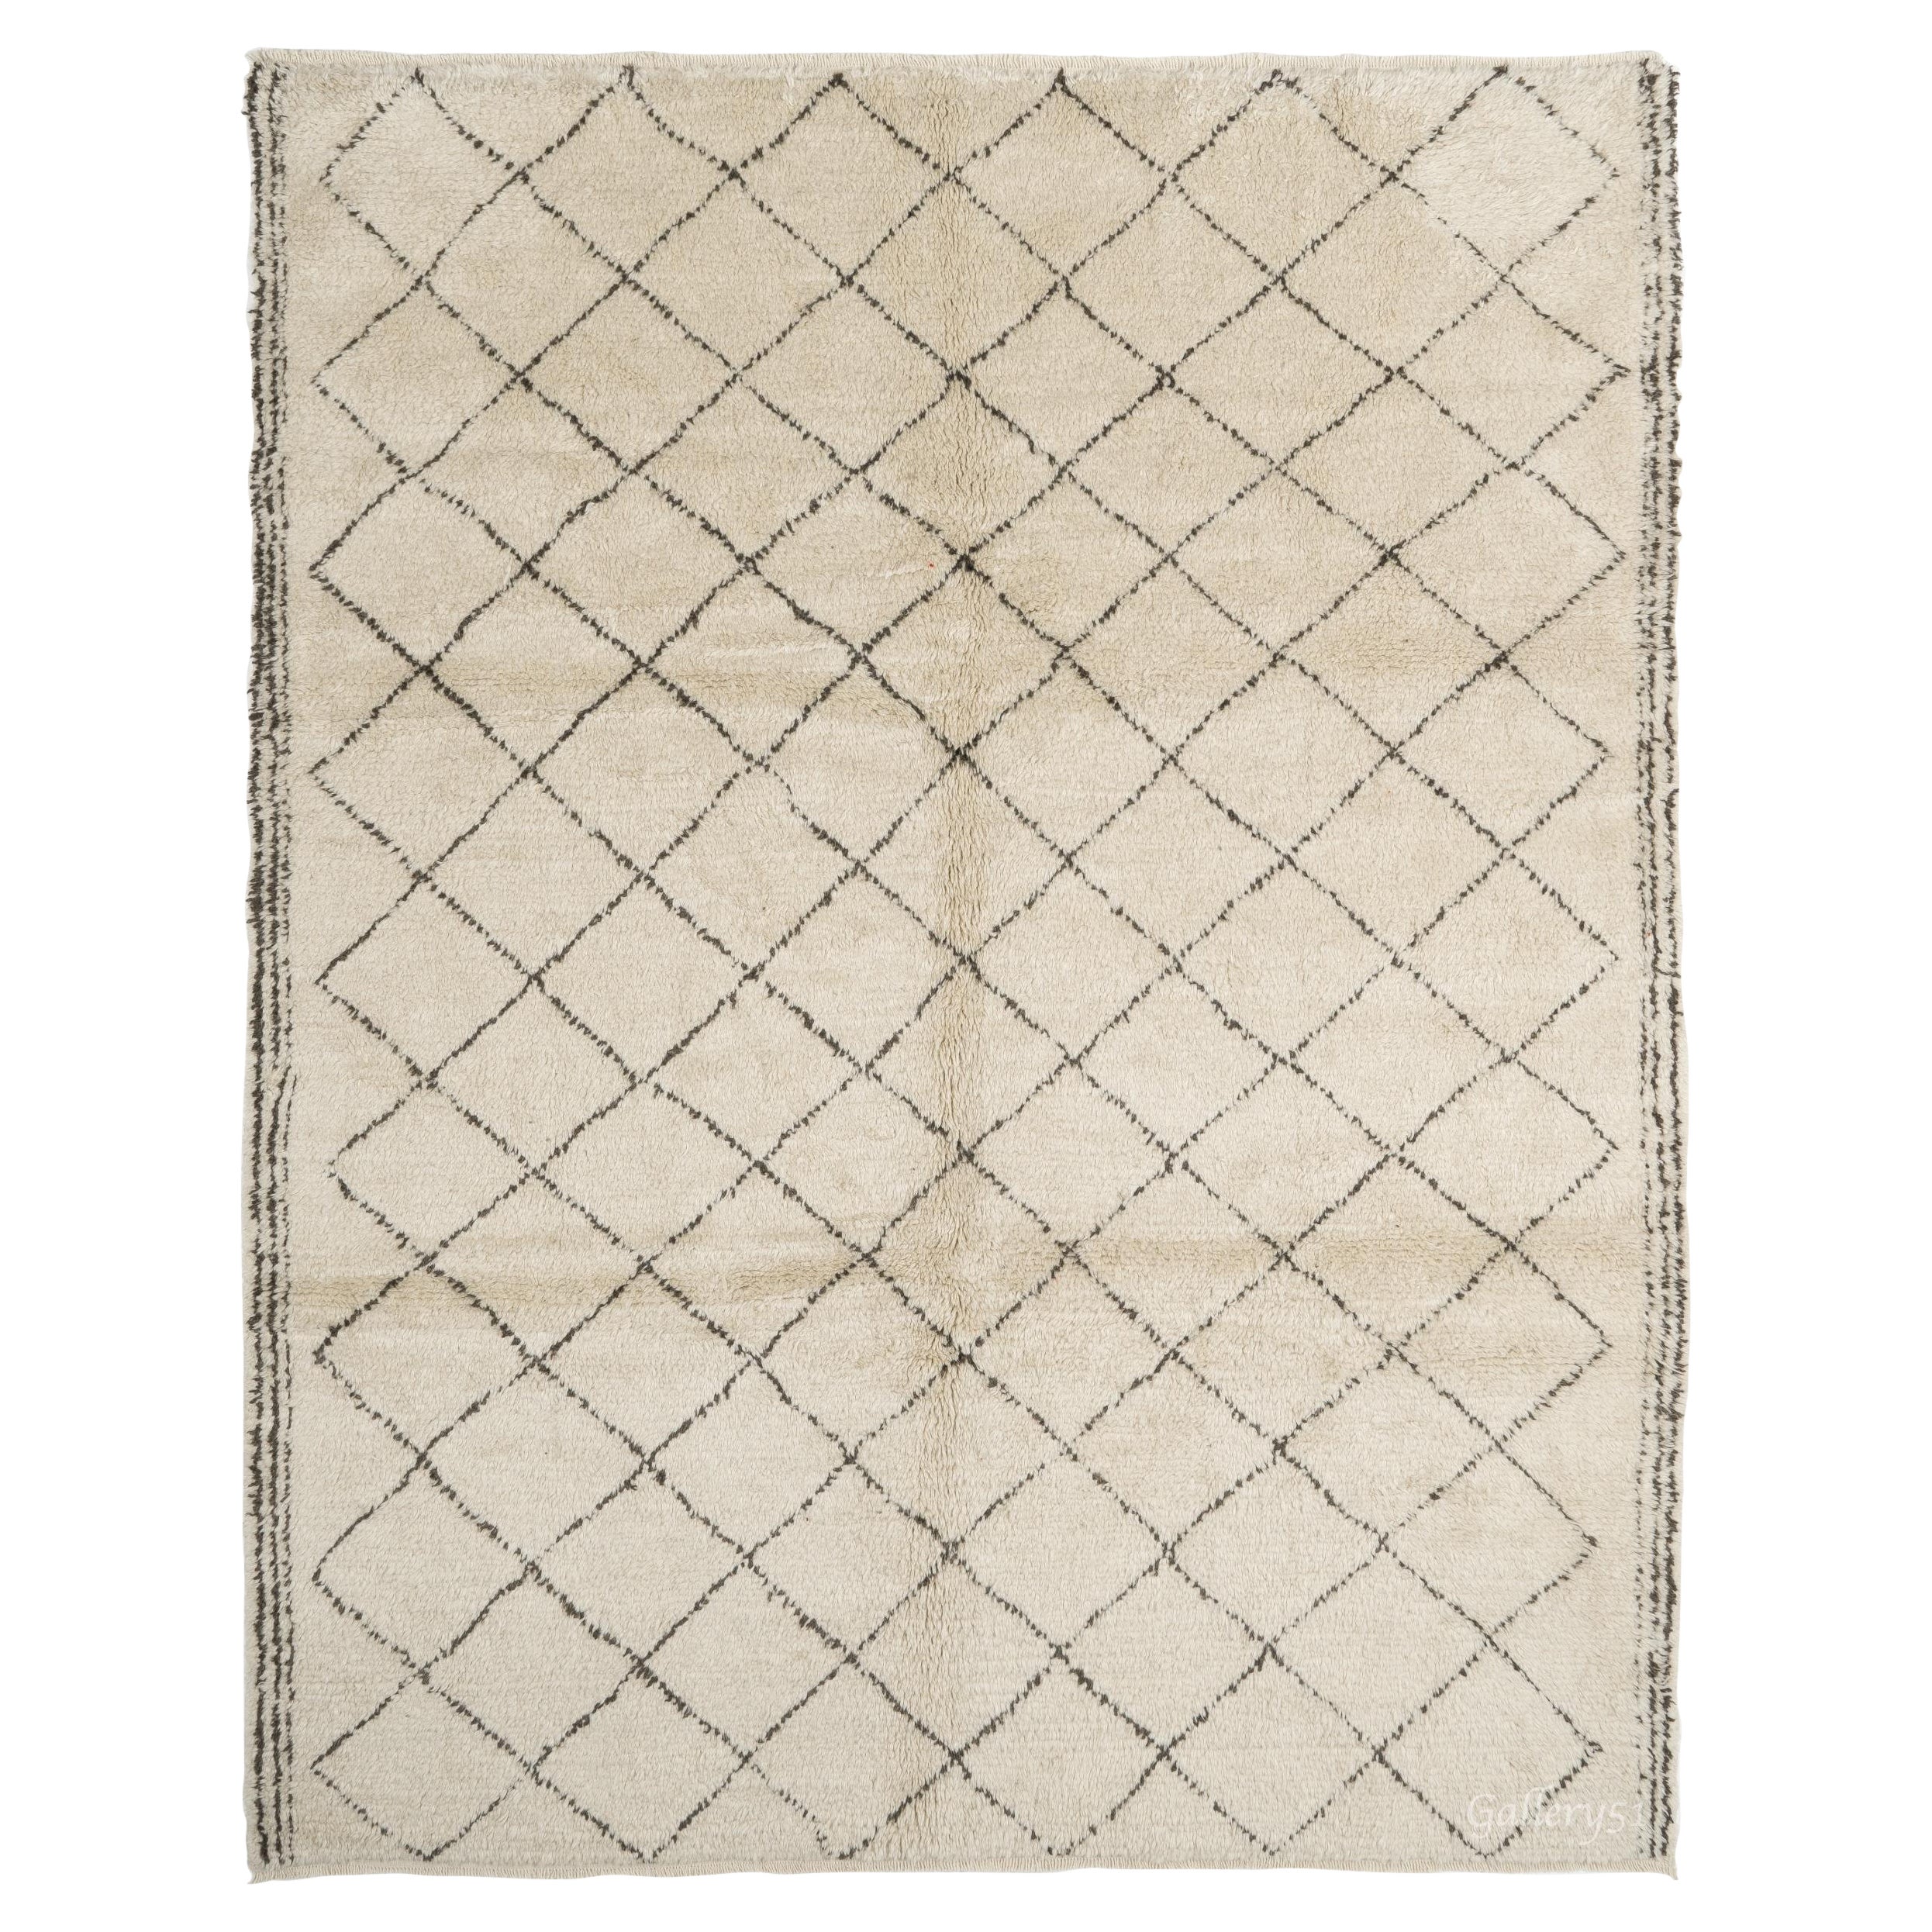 Beni Ourain Wool Rug, Hand-Knotted Moroccan Carpet, Custom Option Avl.